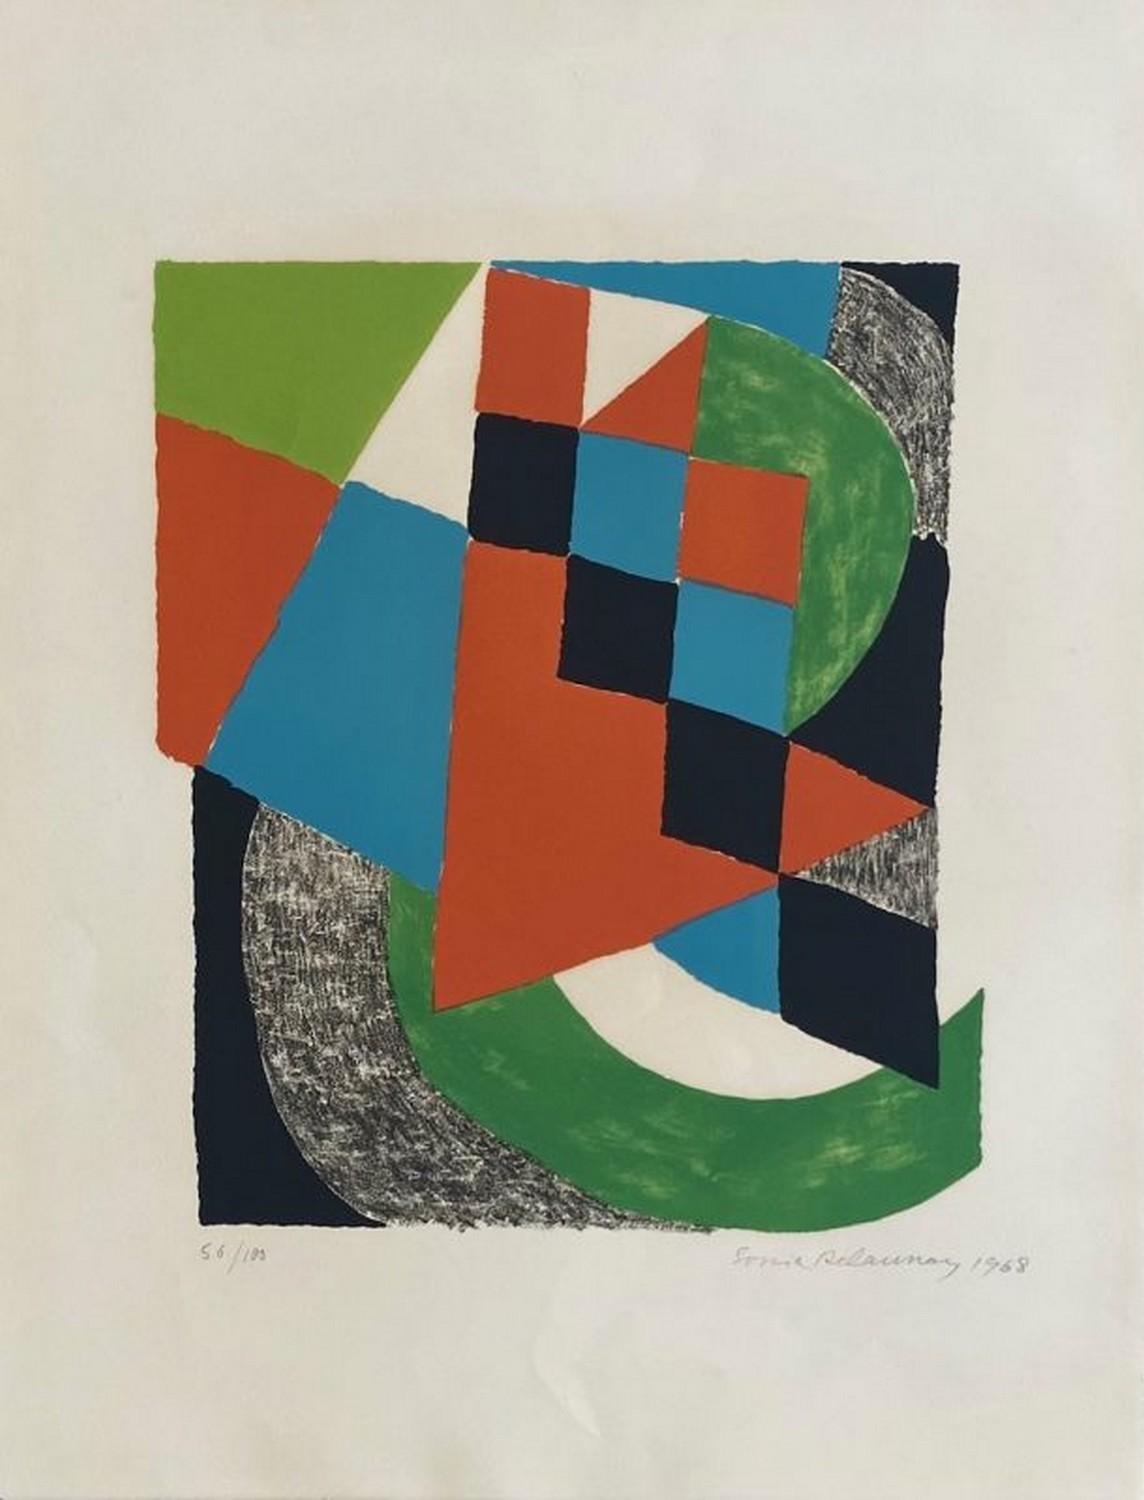 Abstract Print Sonia Delaunay - Damiers verts 